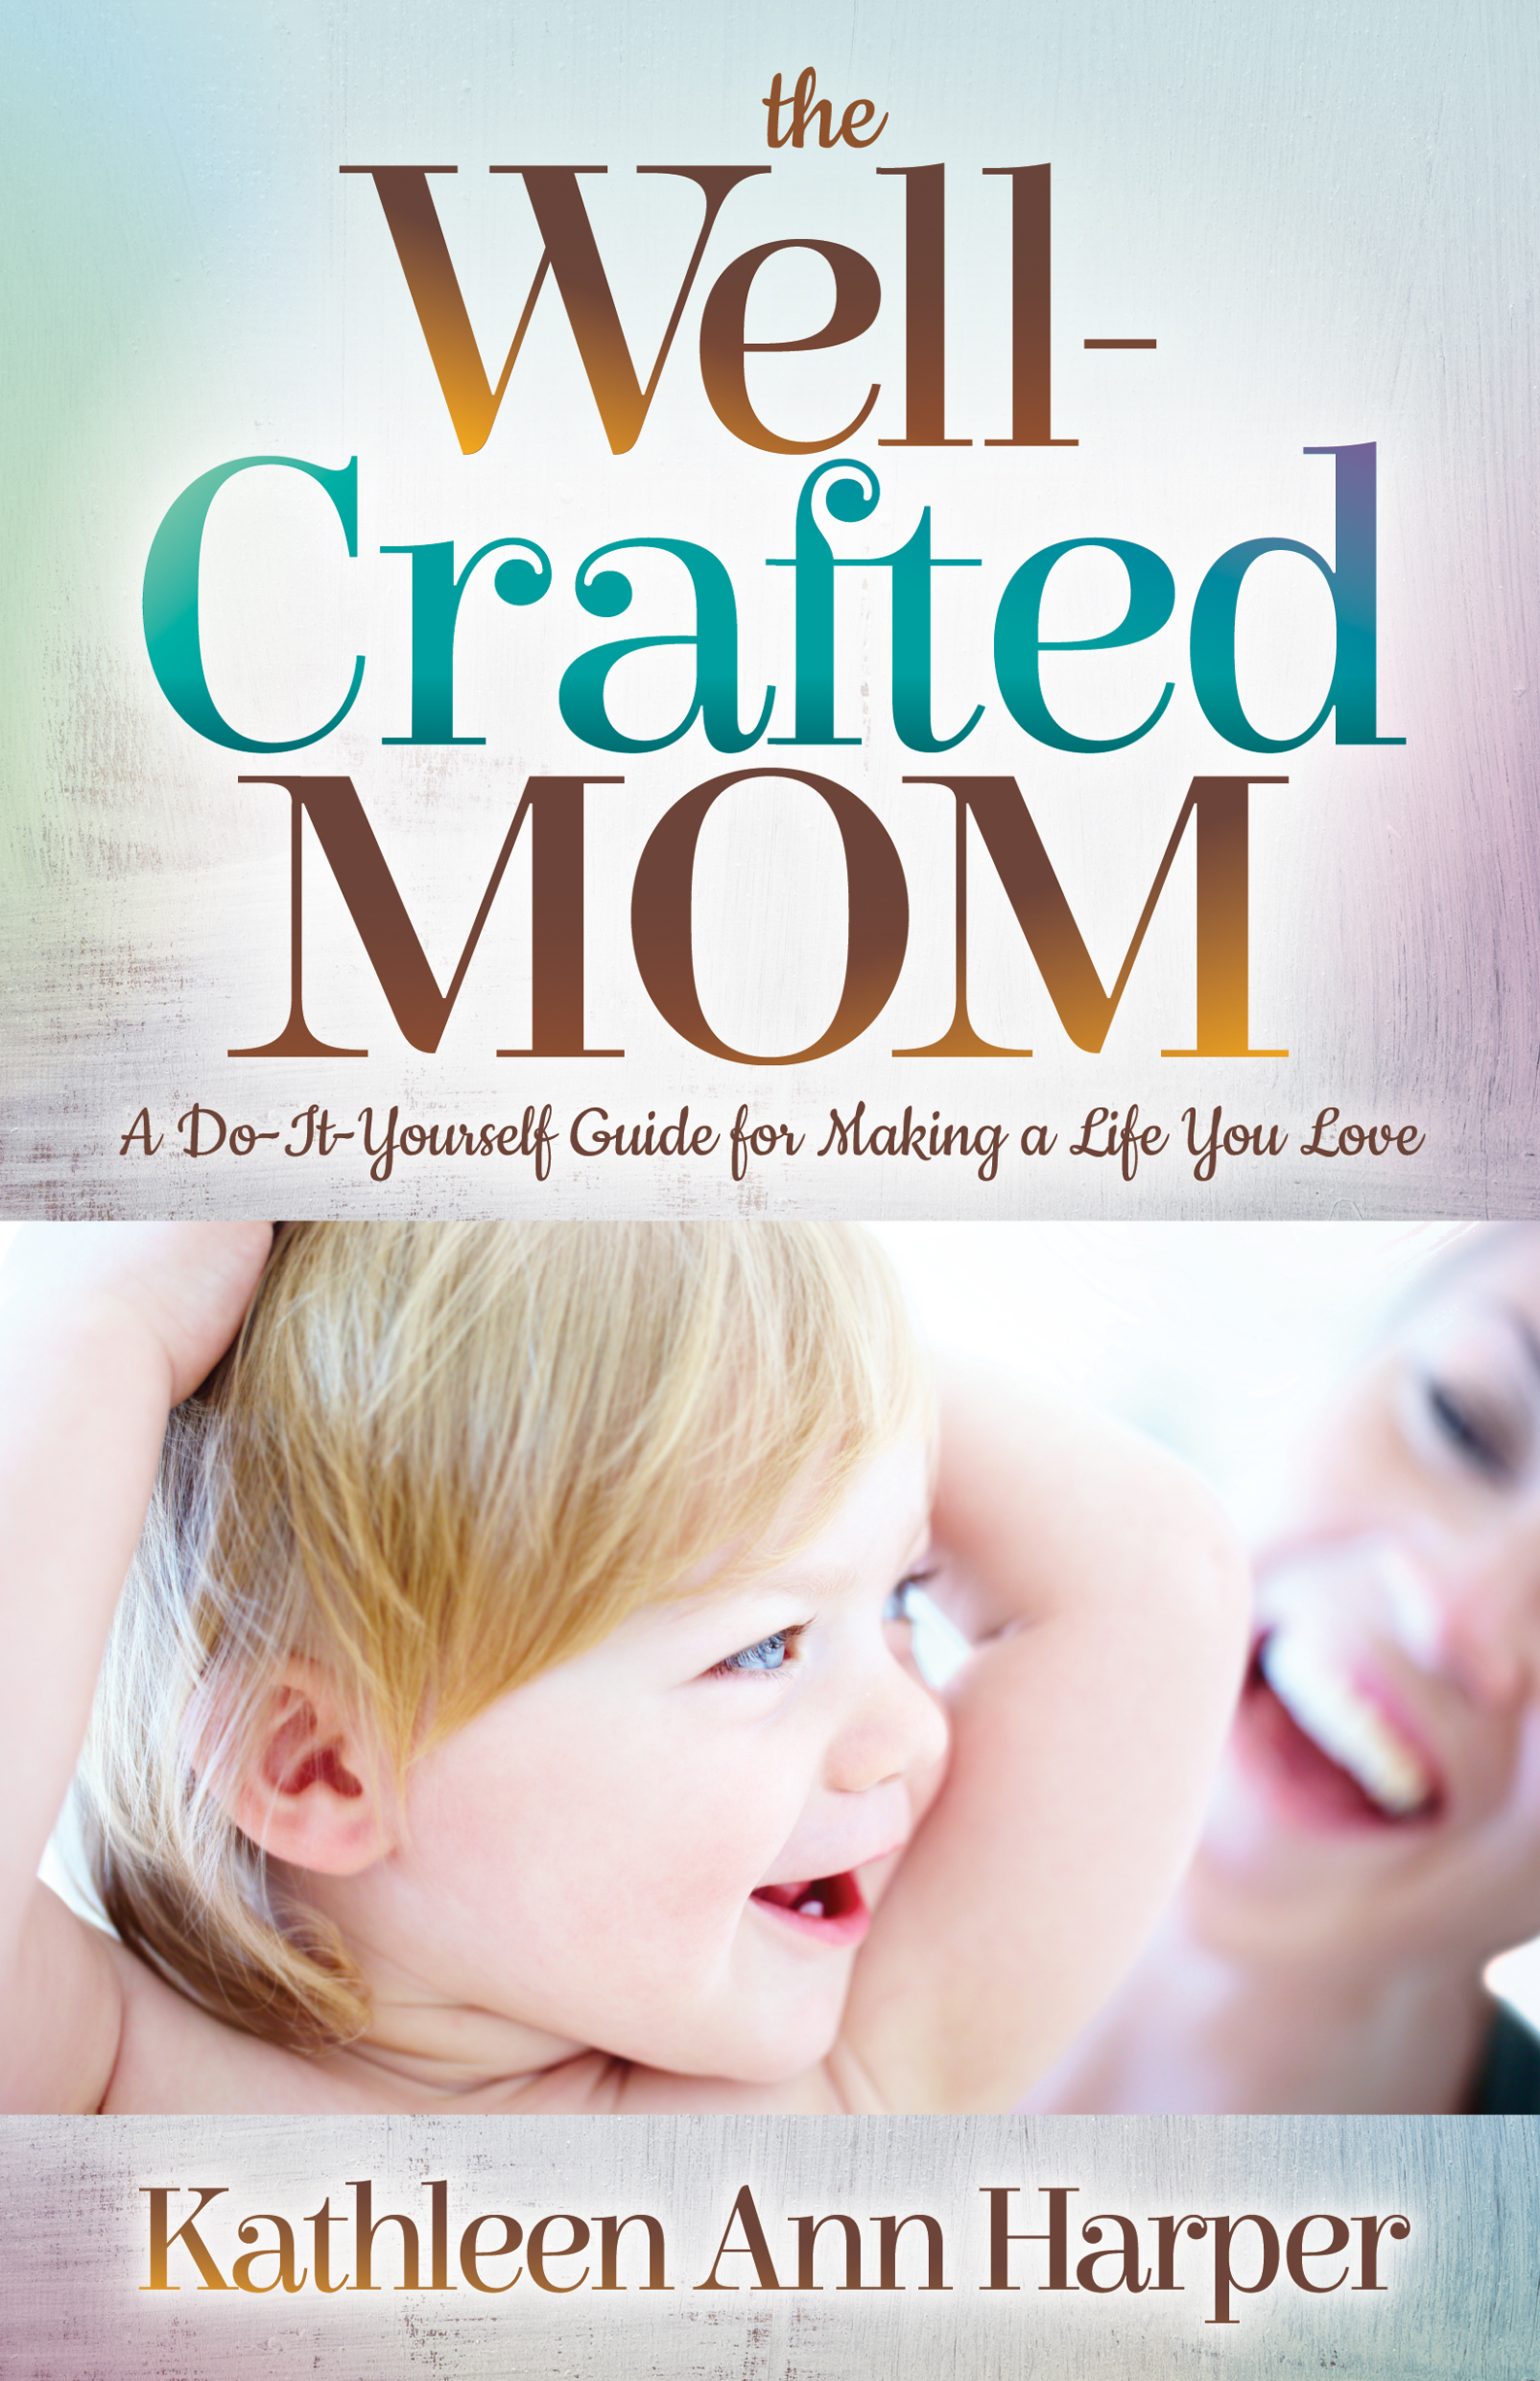 FREE: The Well-Crafted Mom: A Do-It-Yourself Guide for Making a Life You Love by Kathleen Ann Harper